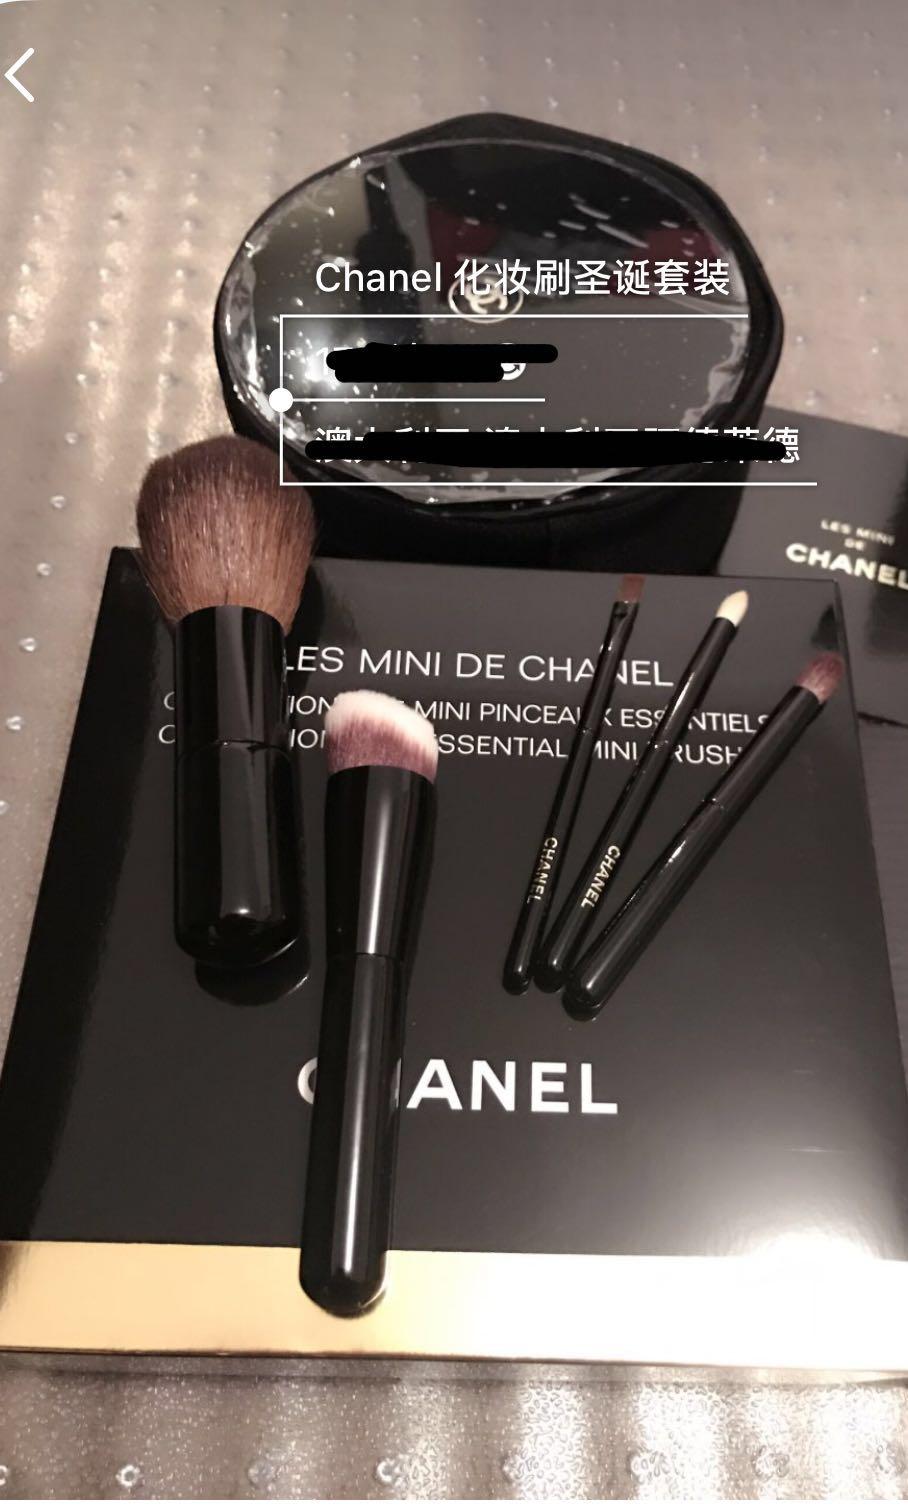 Chanel limited edition make up brush, Beauty & Personal Care, Face, Makeup  on Carousell